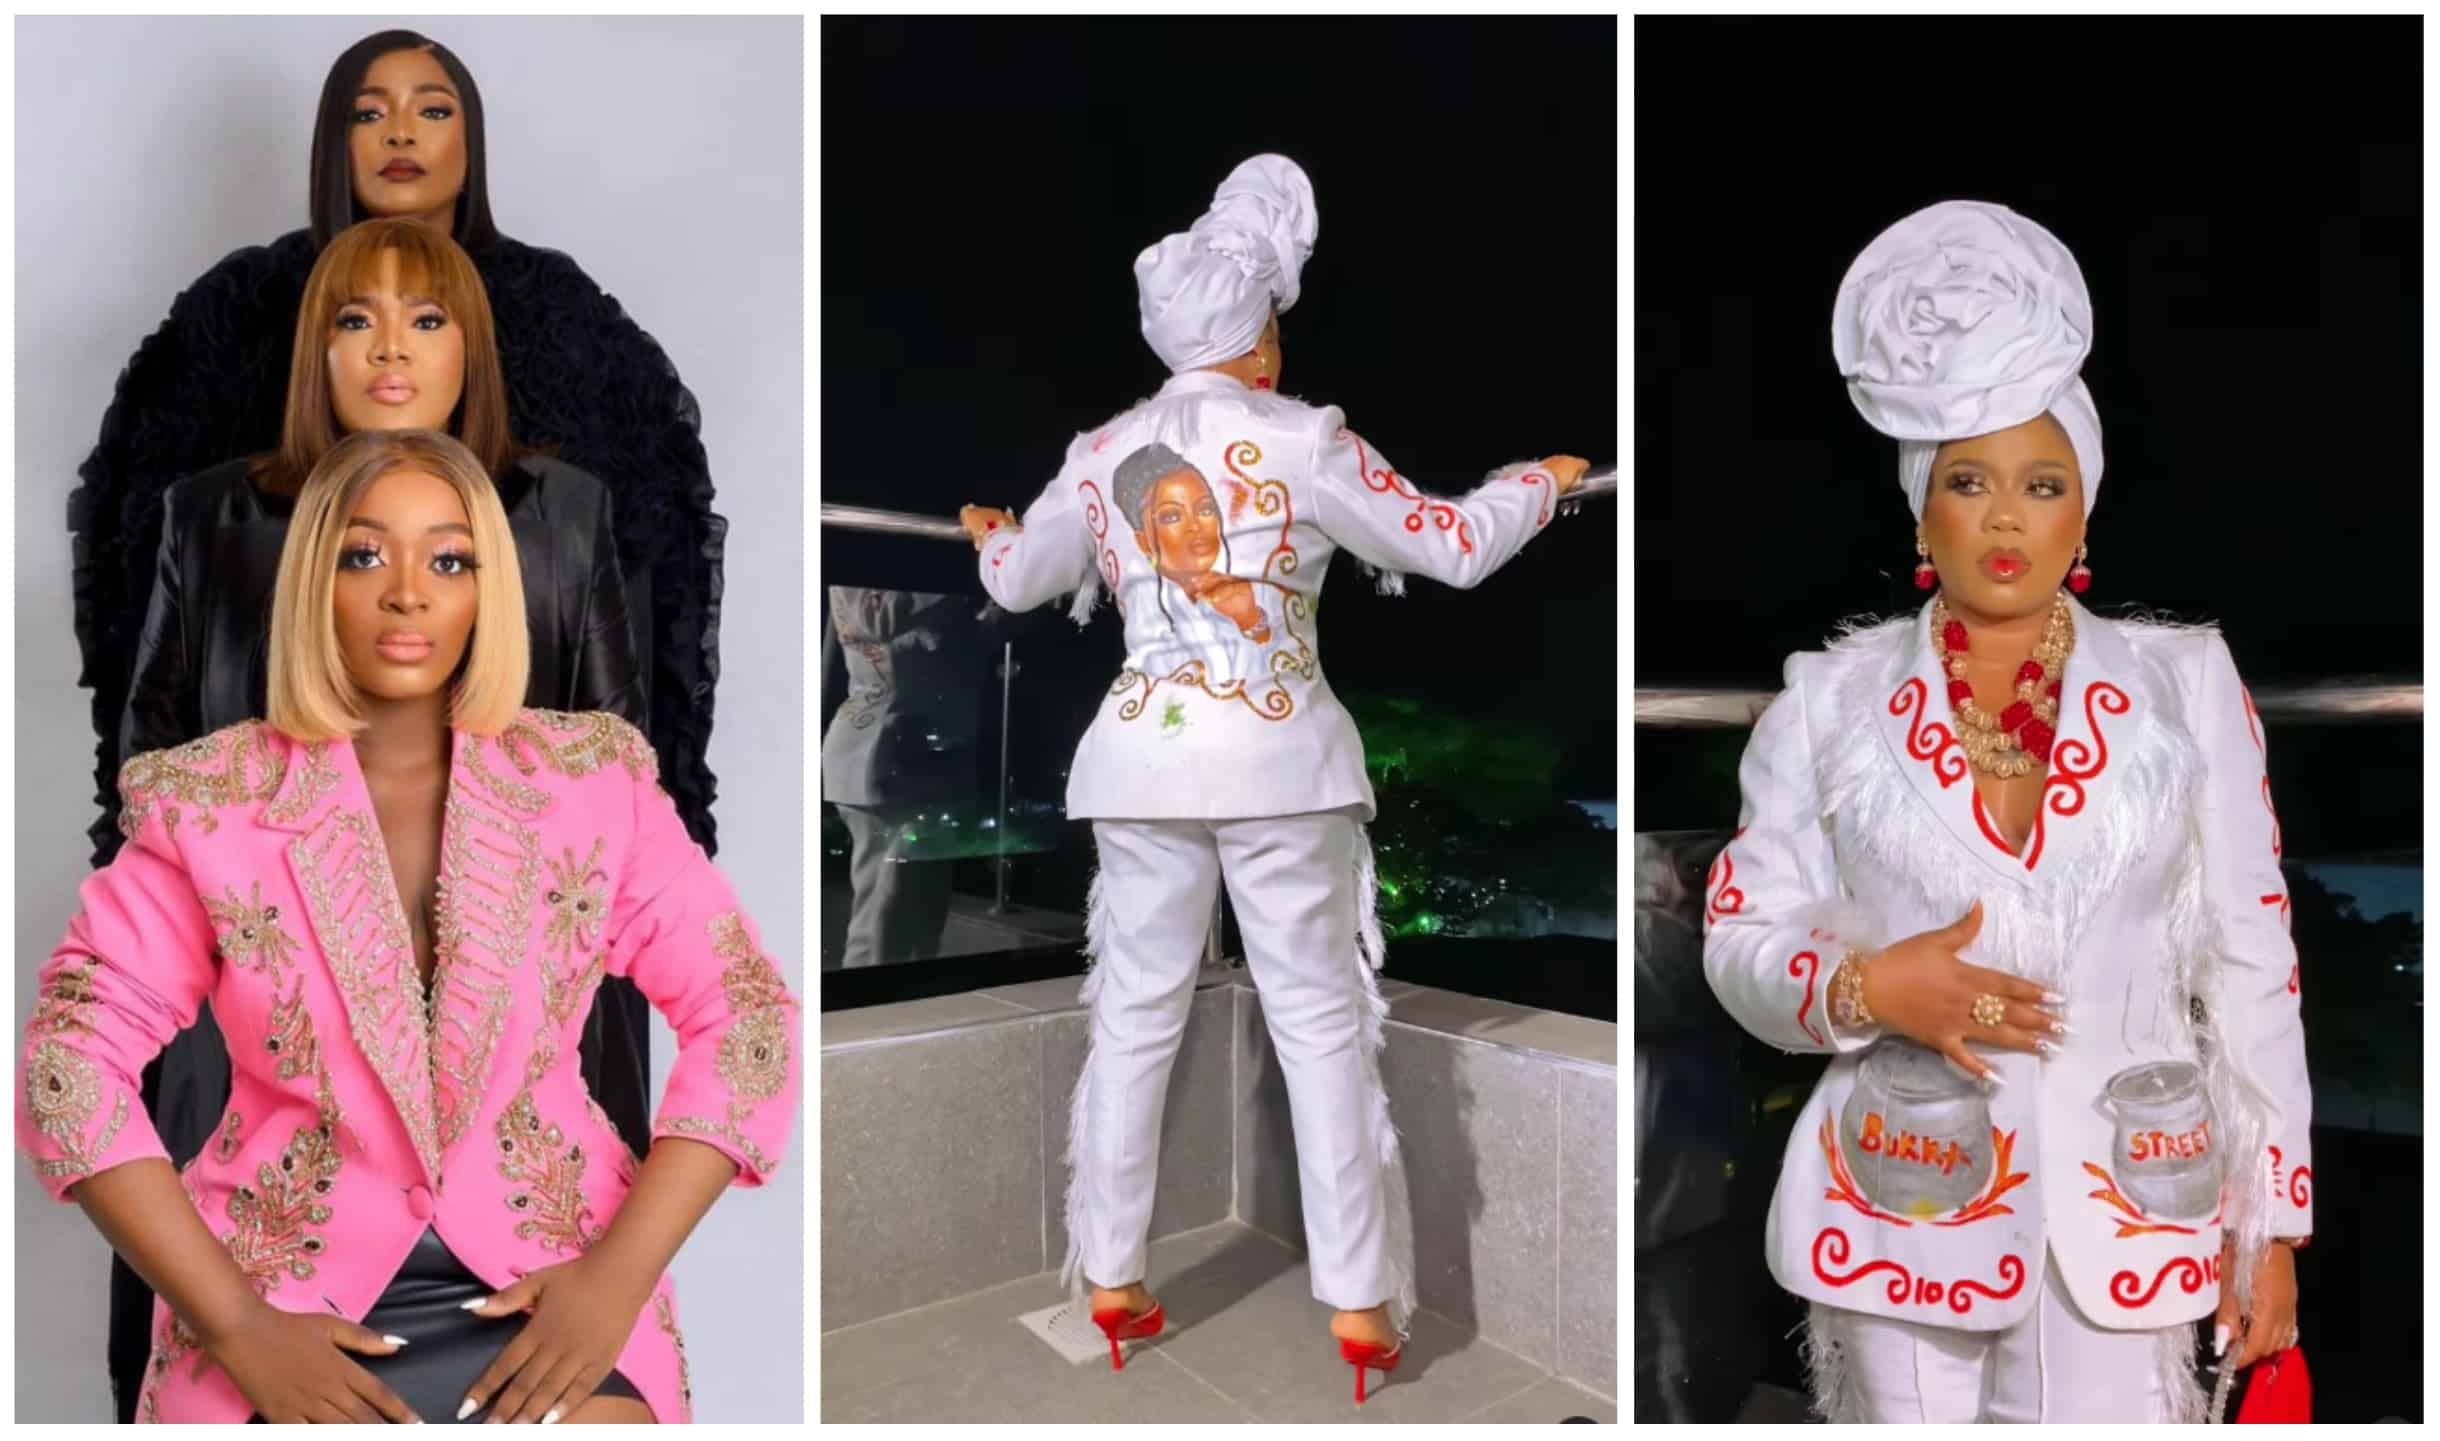 Toyin Abraham threatens Toyin Lawani after wearing outfit with Funke Akindele's face